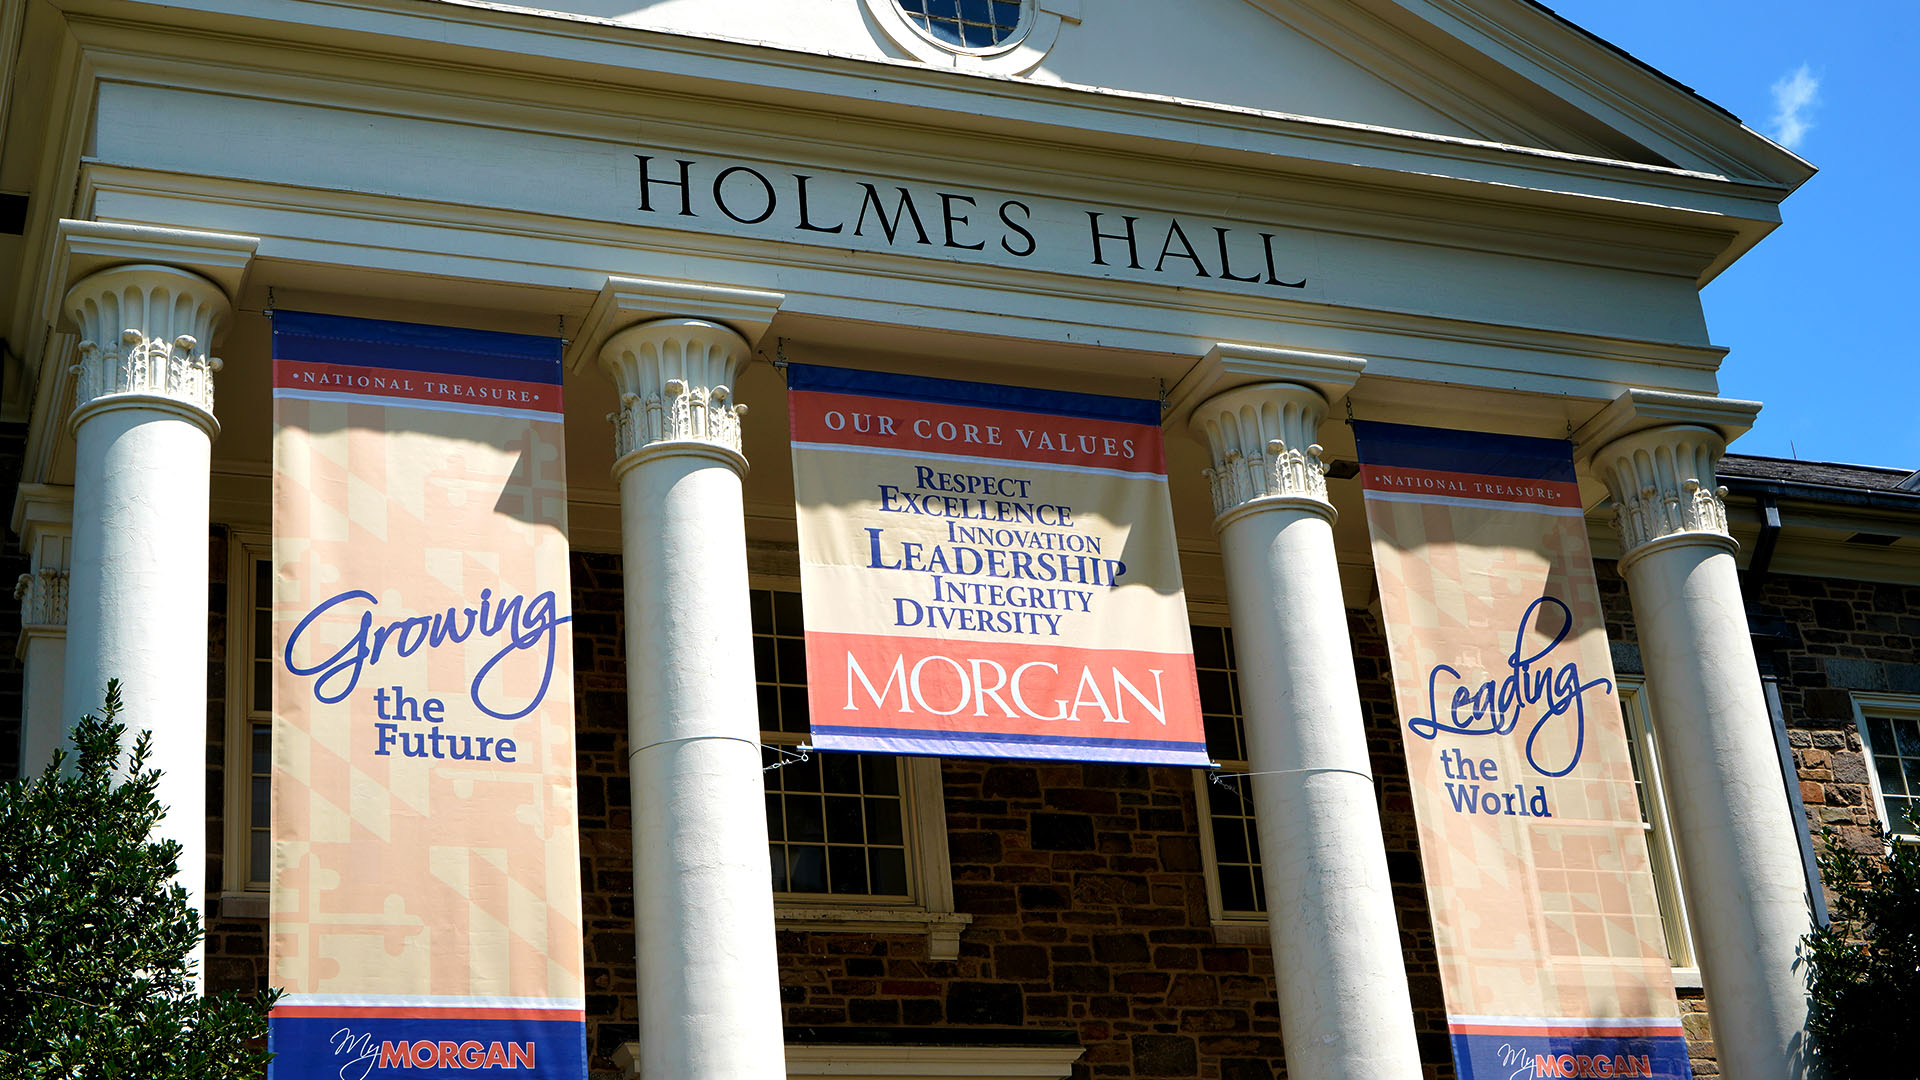 Holmes Hall with 3 banners